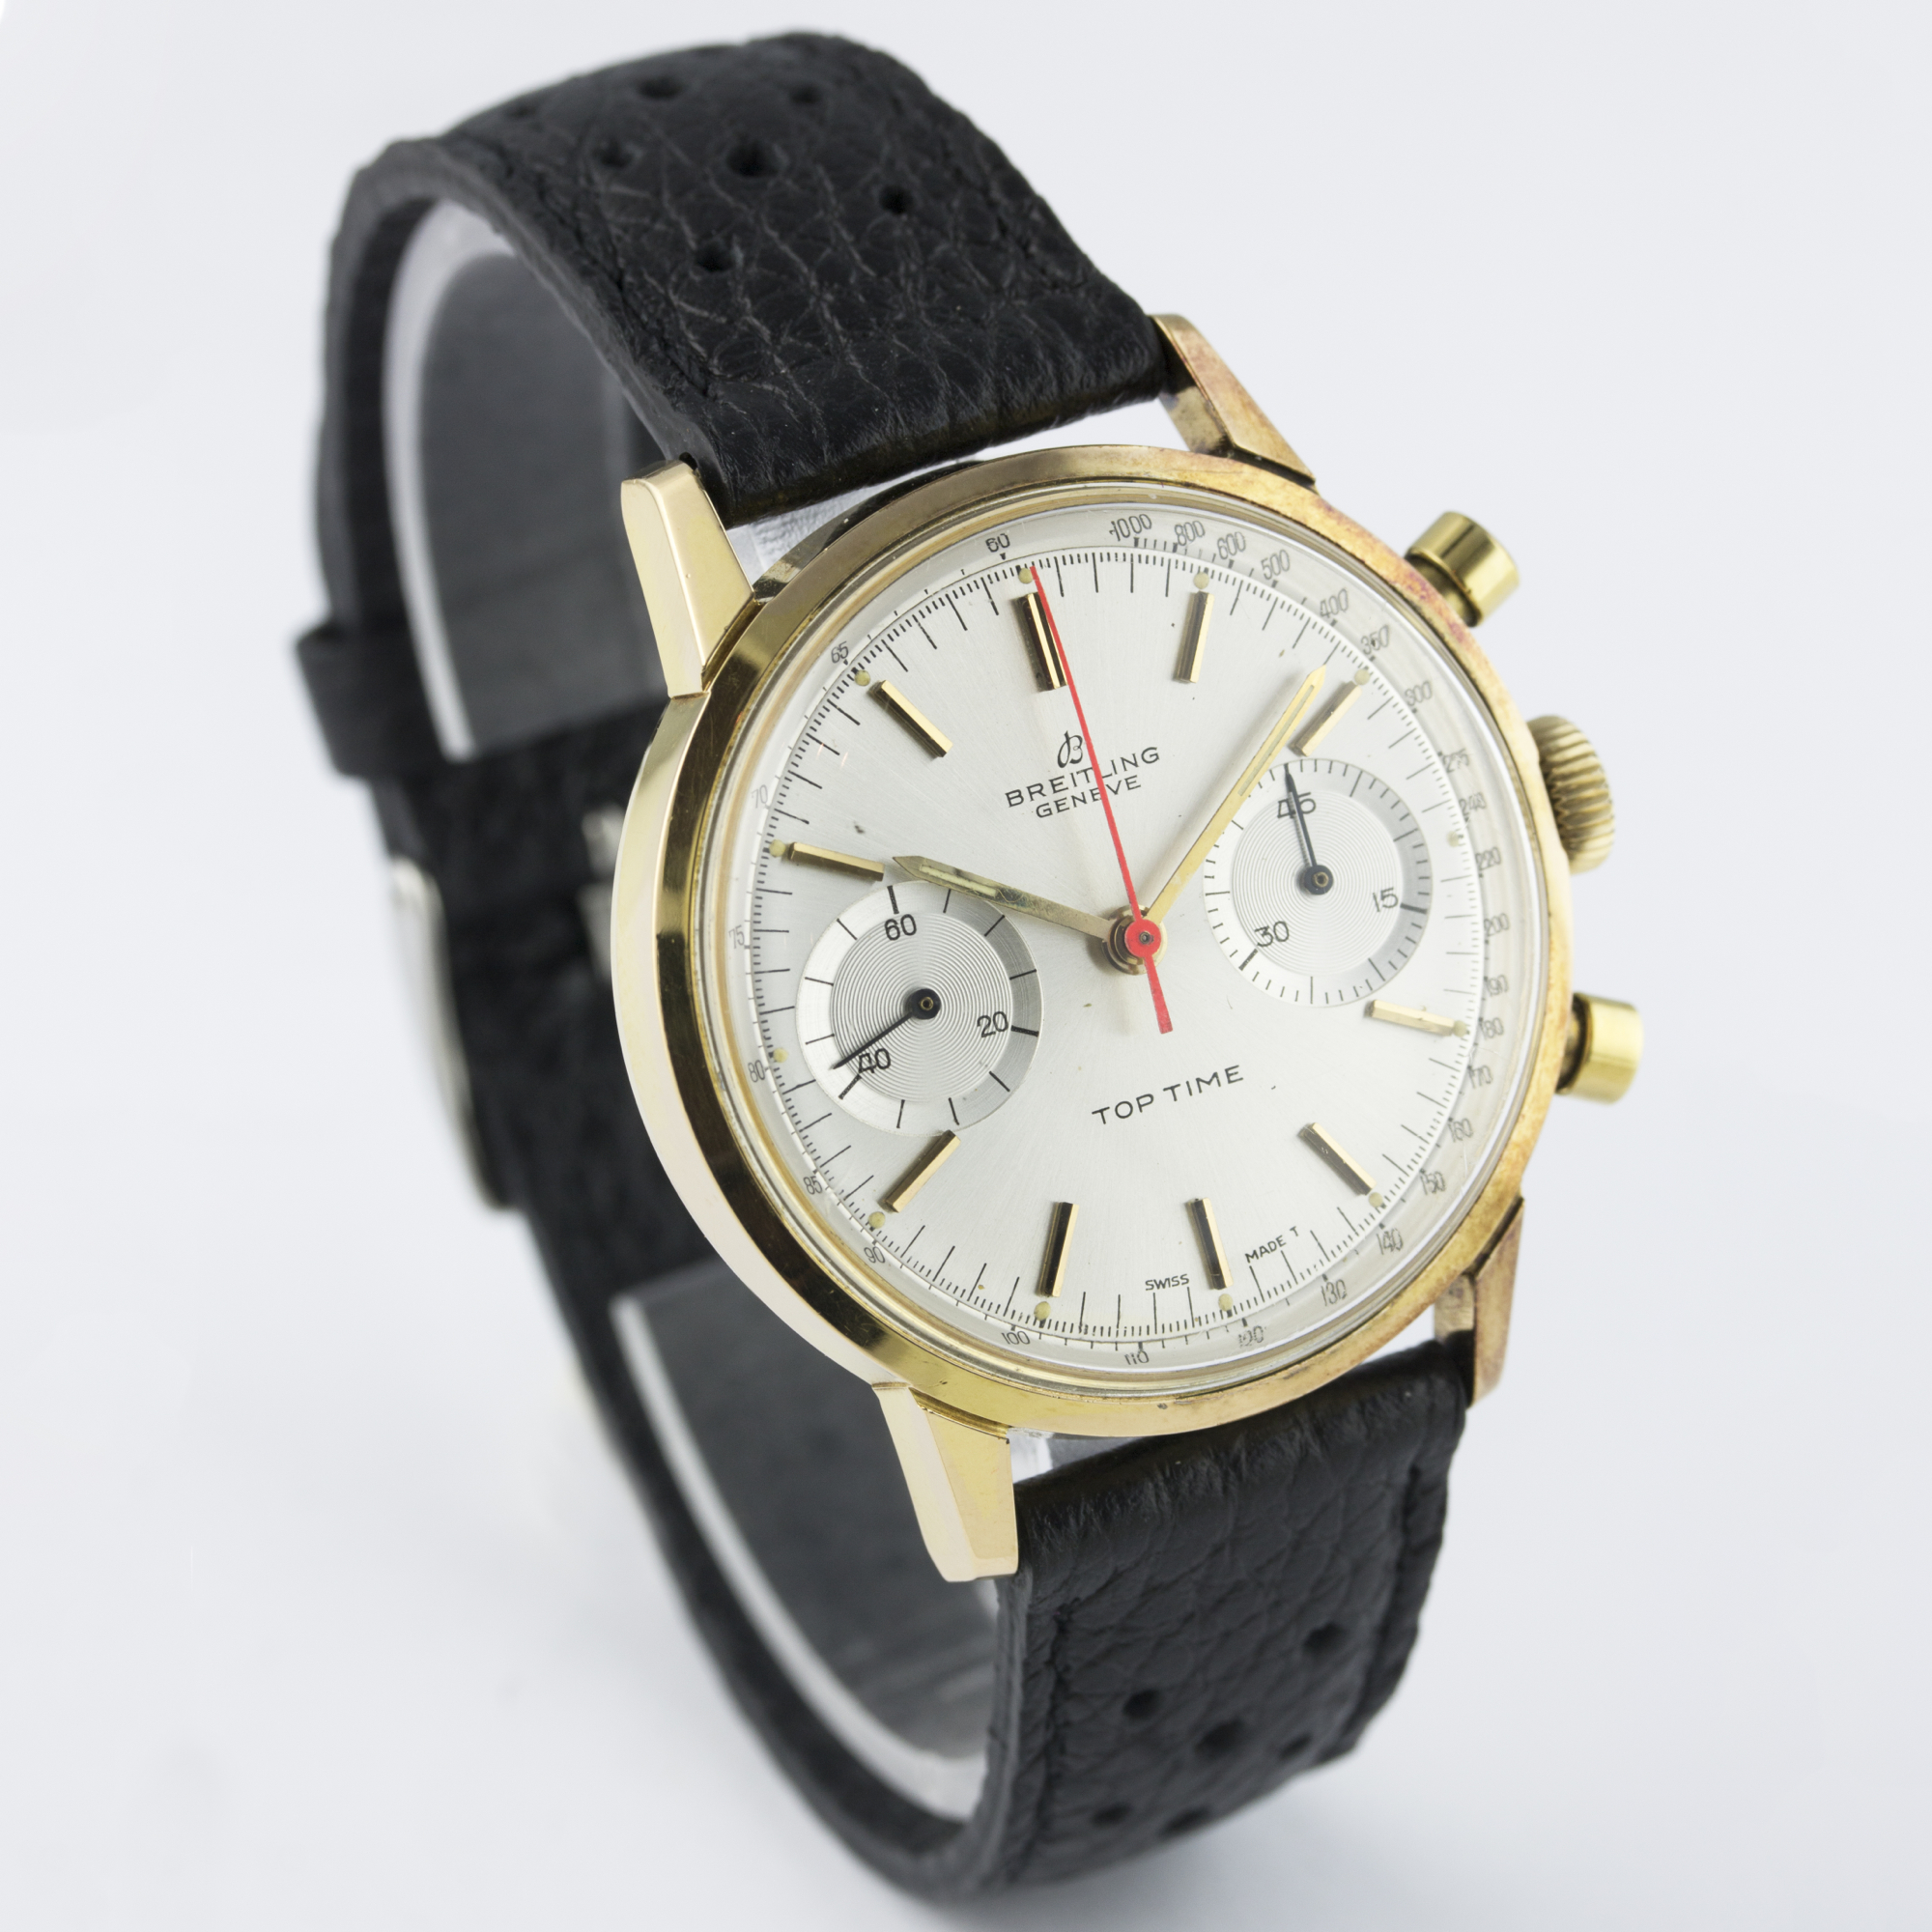 A GENTLEMAN'S "NOS" GOLD PLATED BREITLING TOP TIME CHRONOGRAPH WRIST WATCH CIRCA 1960s, REF. 2000 D: - Image 5 of 6